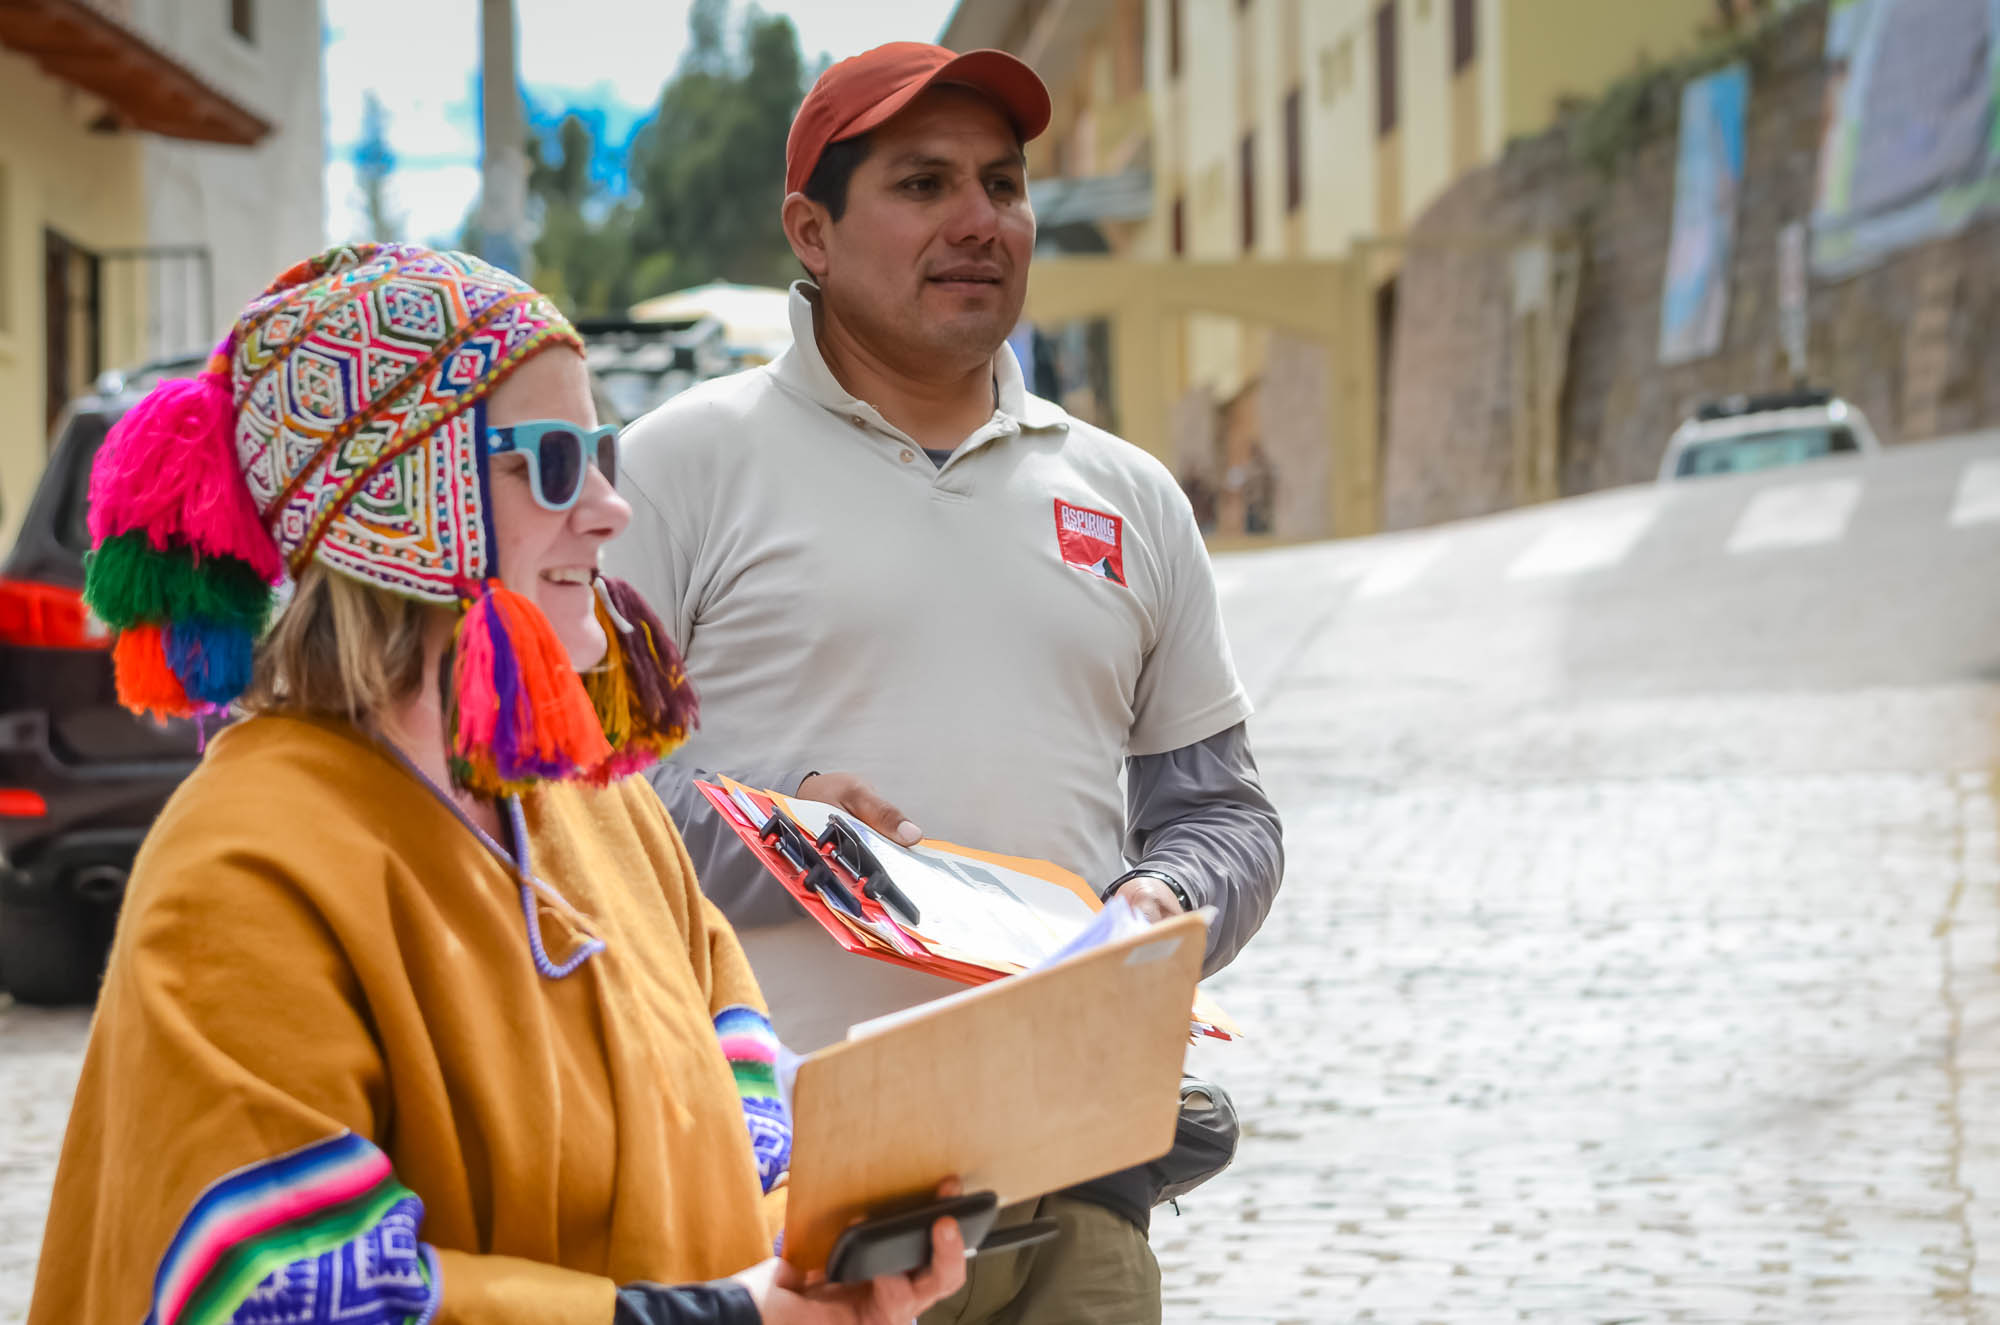 Co-founder Katy Shorthouse and guide Aldo Sanchez managing one of our private Peru tours